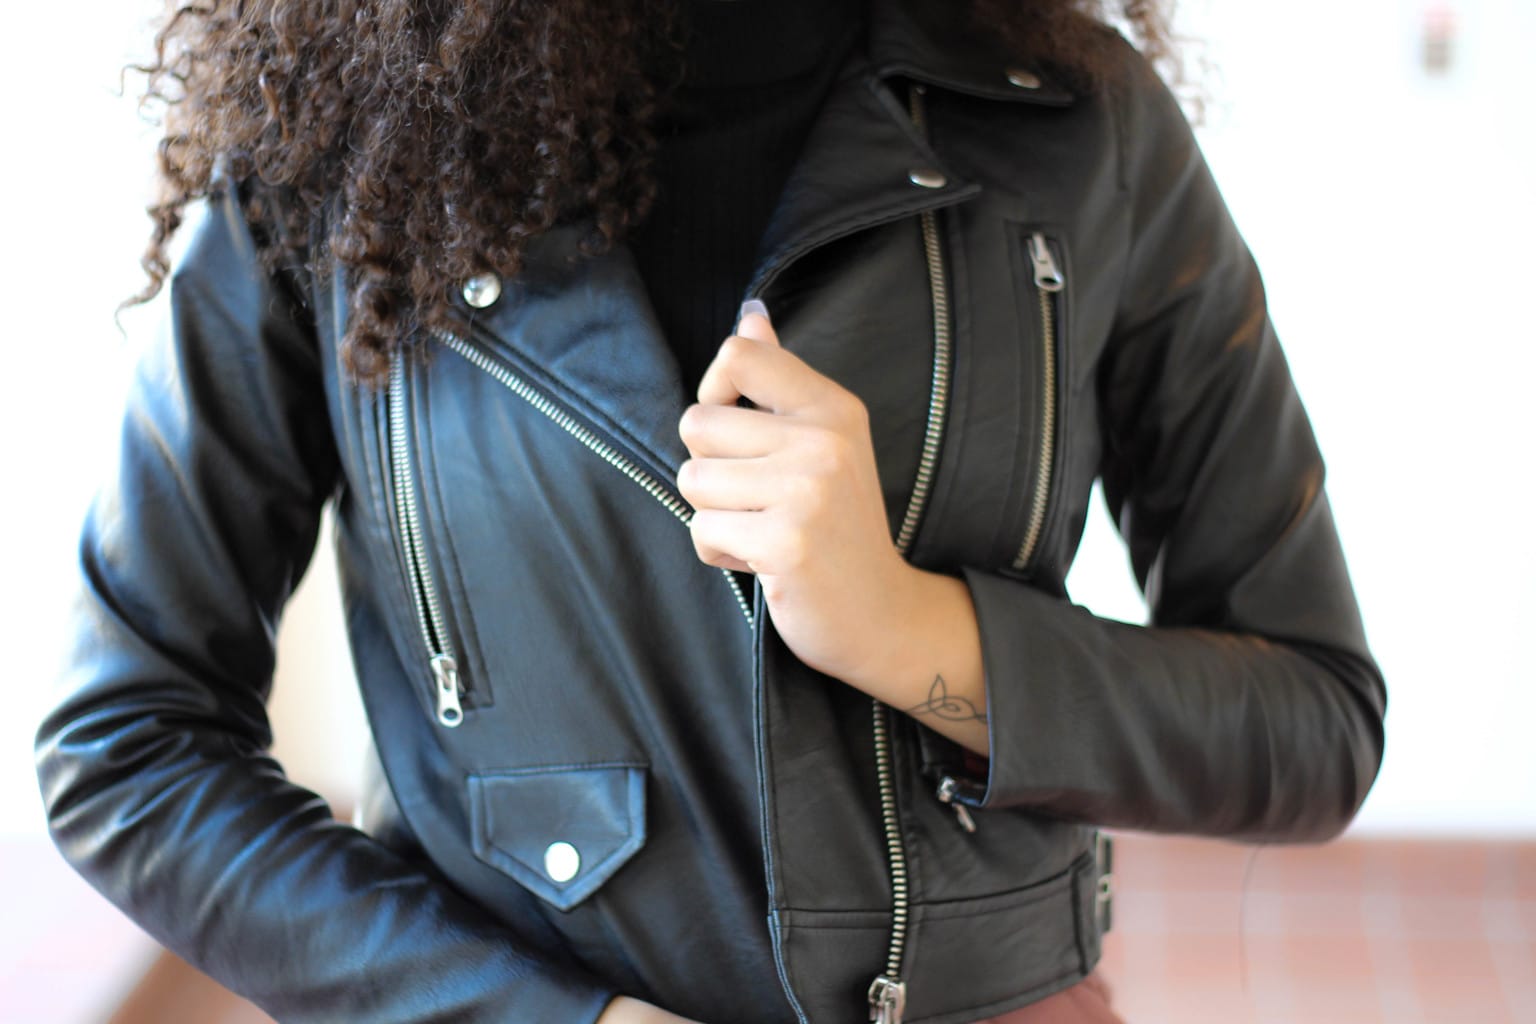 This motorcycle jacket with silver zippers and buttons is perfect for an outerwear piece around campus.